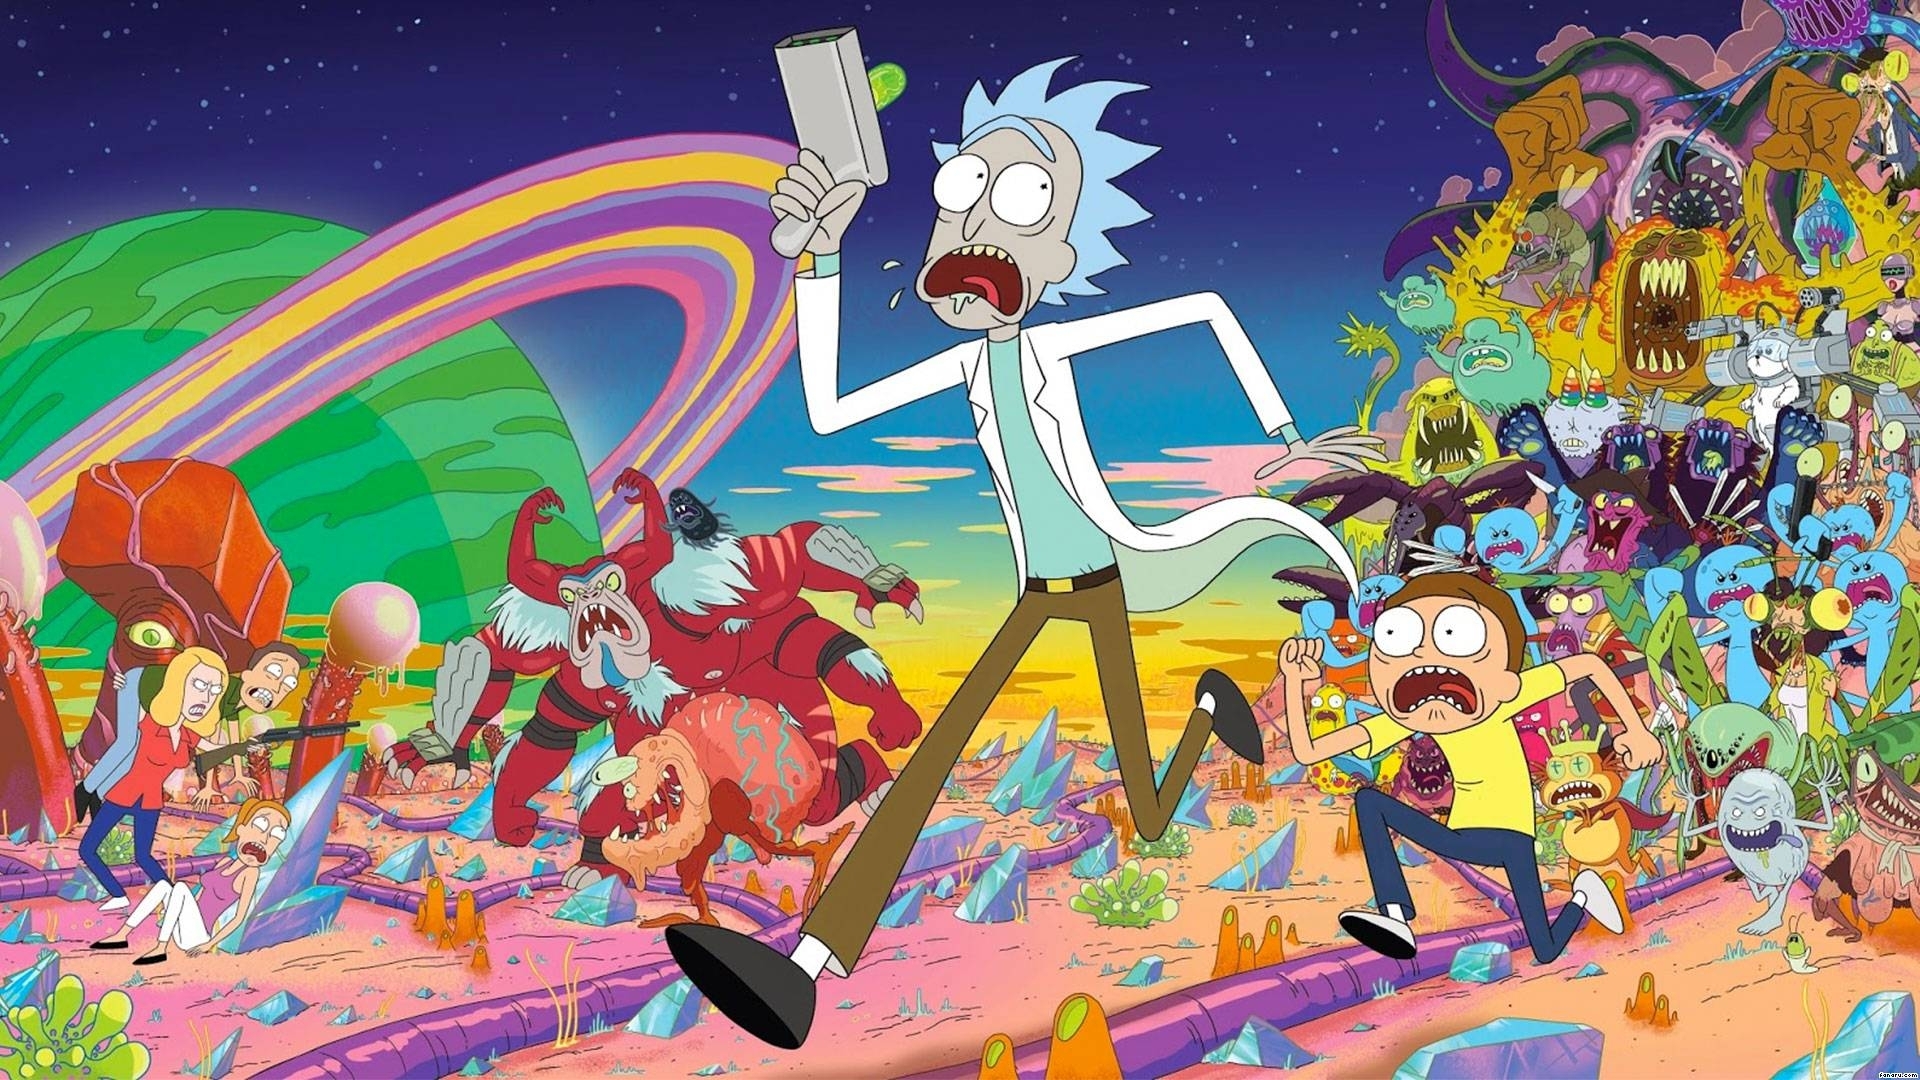 10 Best Rick And Morty Wallpaper Hd FULL HD 1080p For PC Background